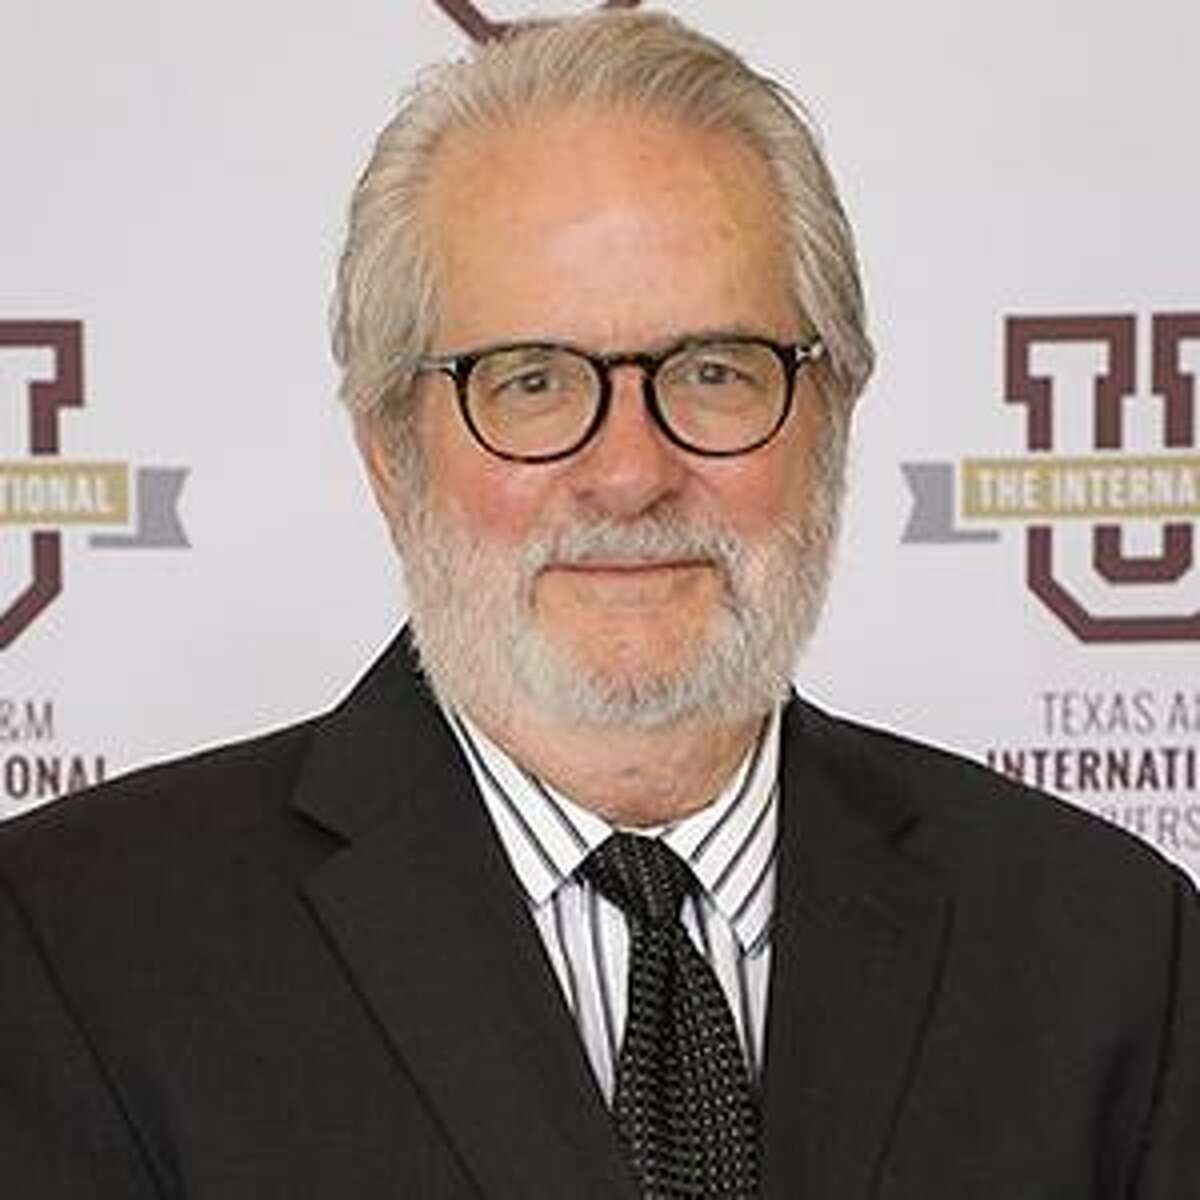 Dr. Tom Mitchell, TAMIU Provost and Vice President for Academic Affairs